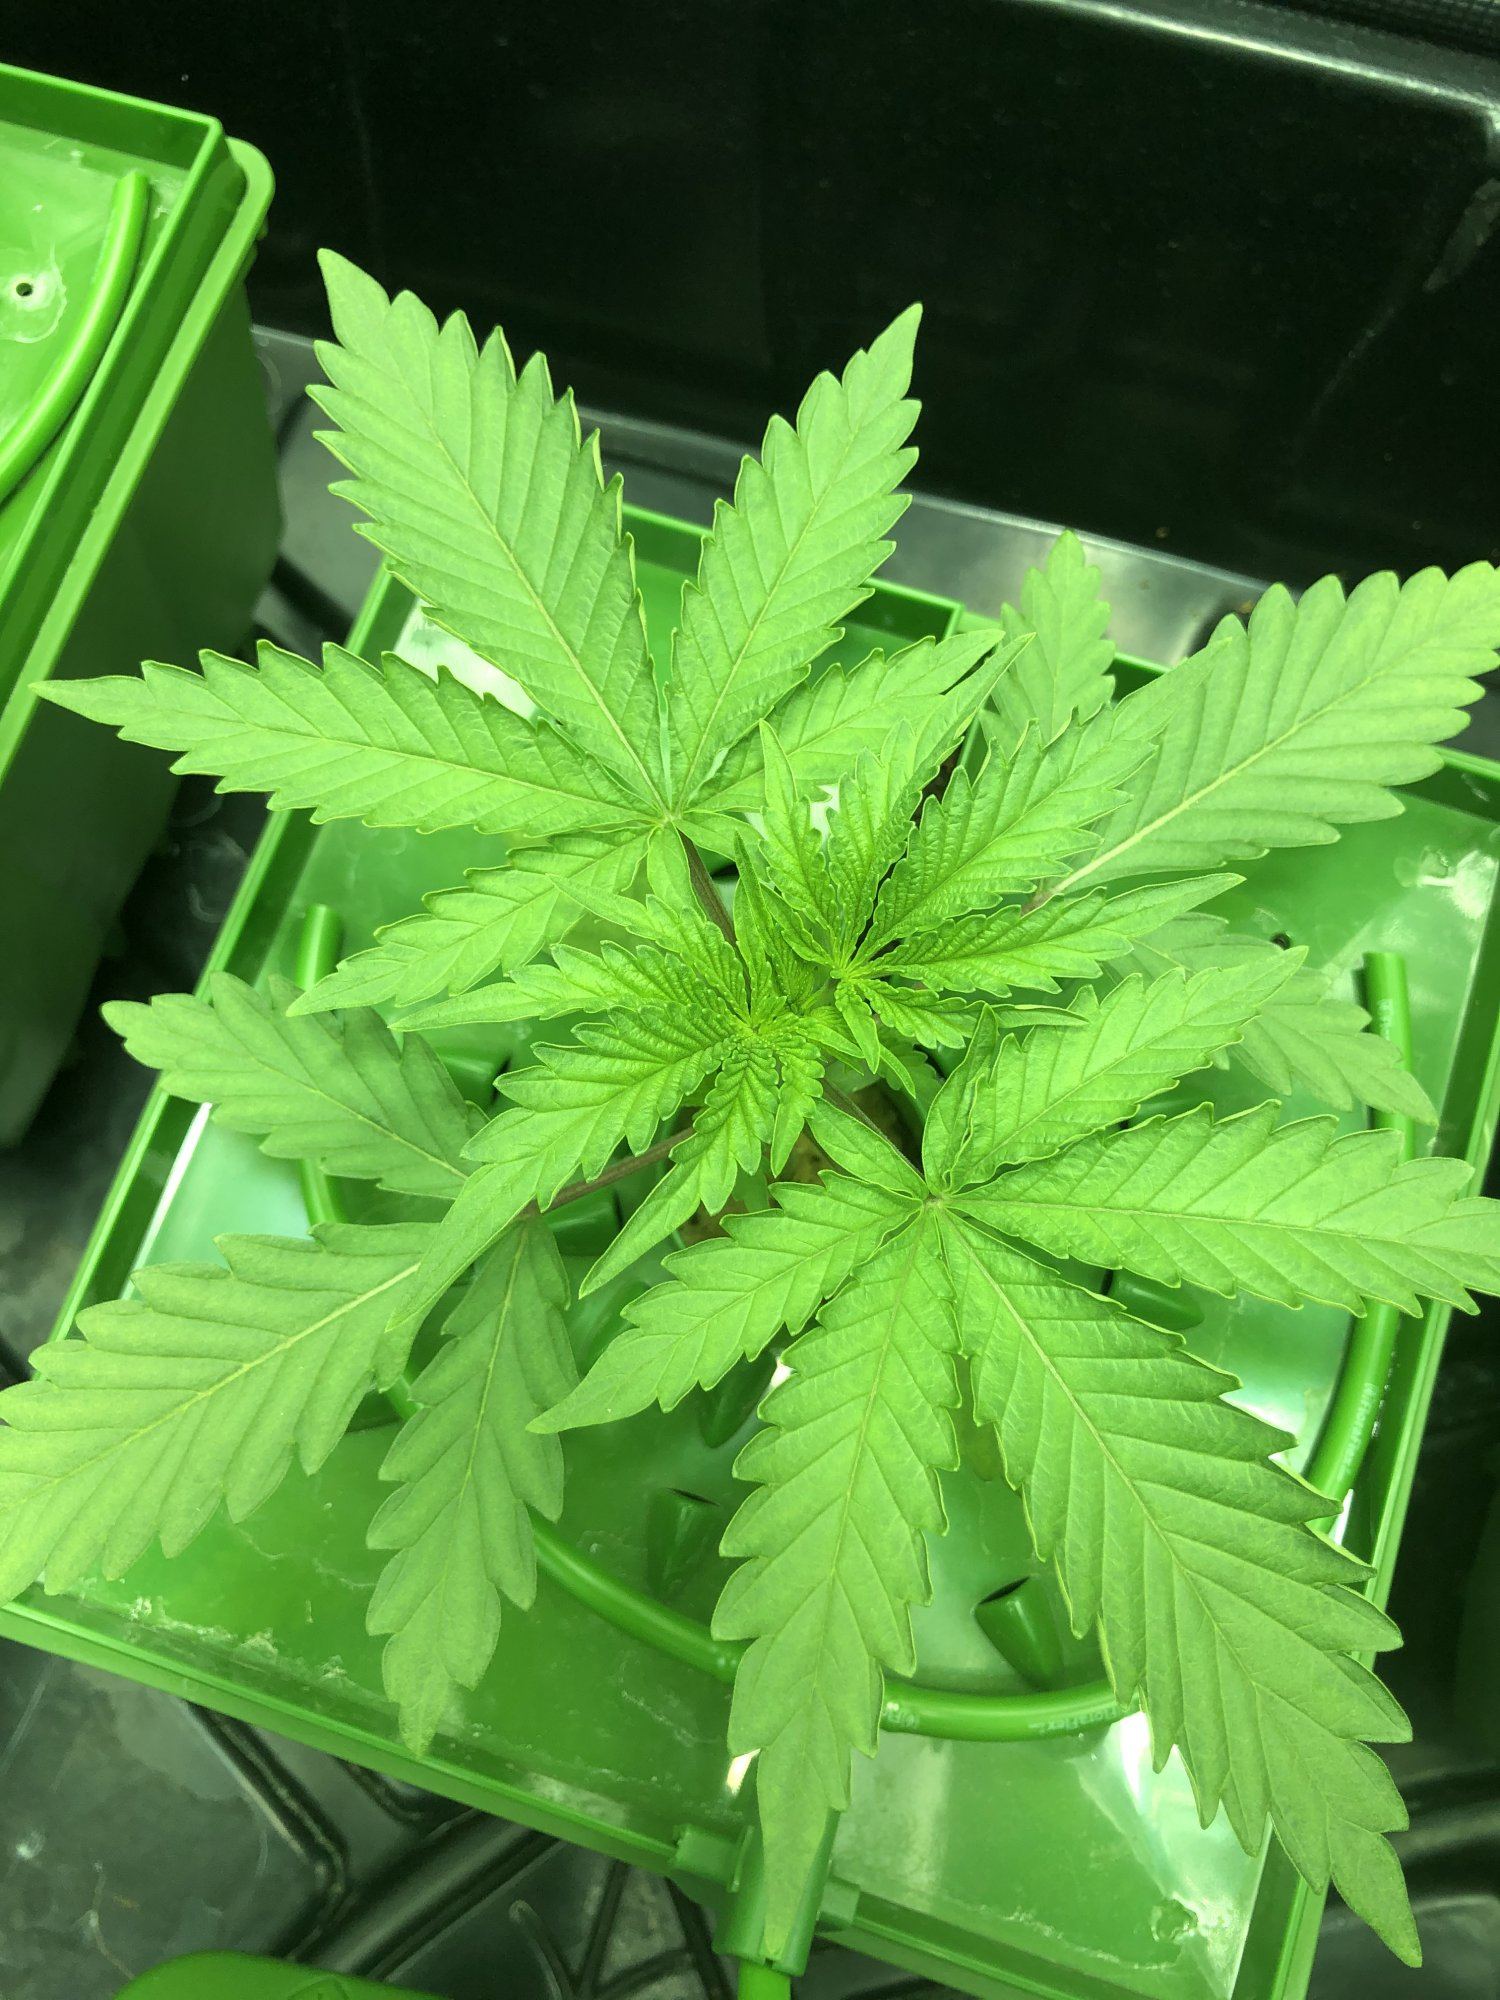 8 iced out plants in a 3x3 7